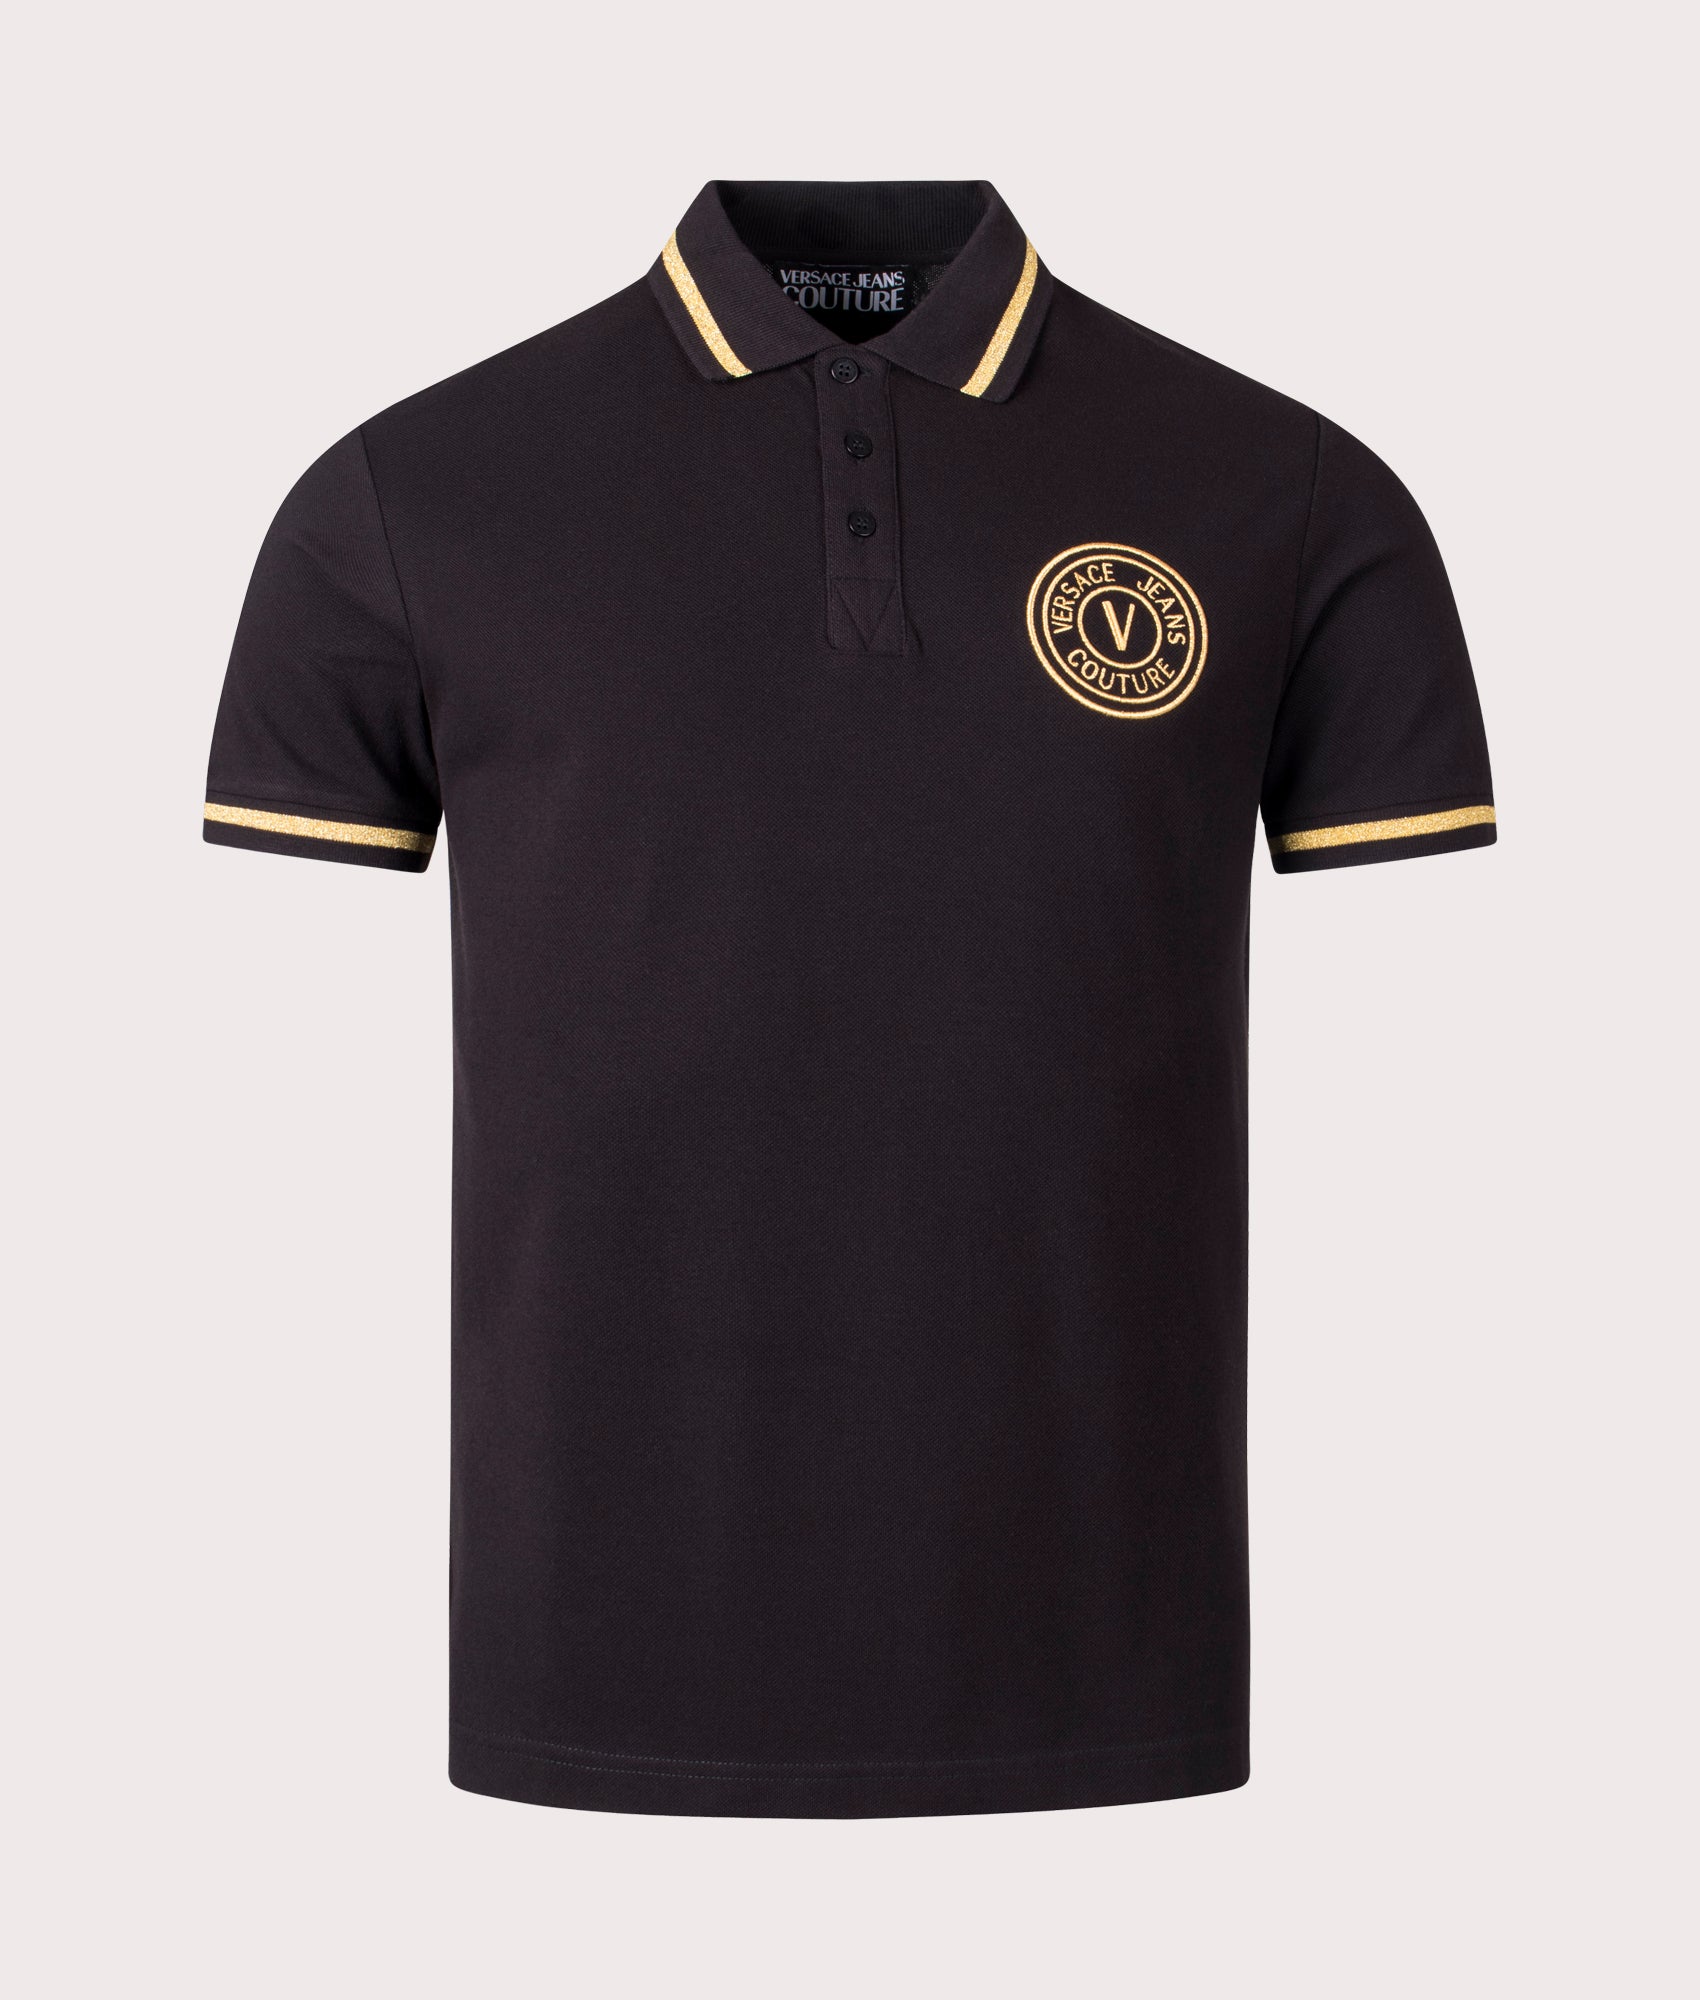 Versace Jeans Couture Mens V Emblem Gold Embroidered Polo Shirt - Colour: G89 Black/Gold - Size: Med